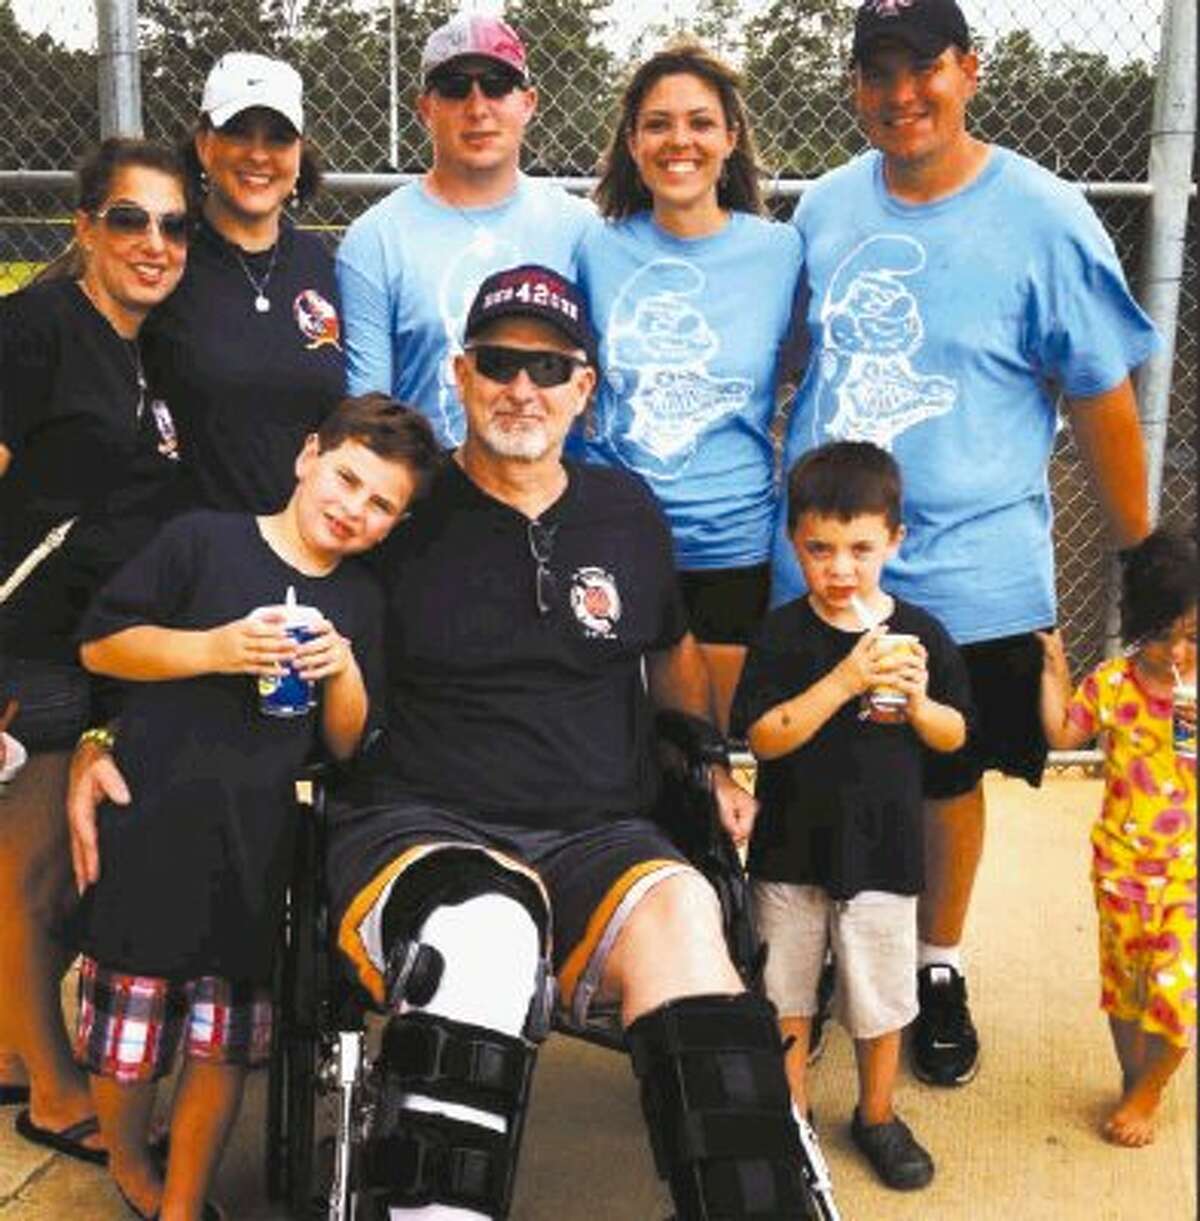 Left to right, (back row) Nicole Garner, who lost her brother Robert in the recent Houston motel fire, poses for a picture with his wife, Amy Yarbrough, Forrest Dowling, who is the son of Captain William Dowling, still hospitalized, Ashley Romagus, Michael Romagus, (front row) Austin Yarbrough, Robert Yarbrough, Trey Romagus and Molly Romagus